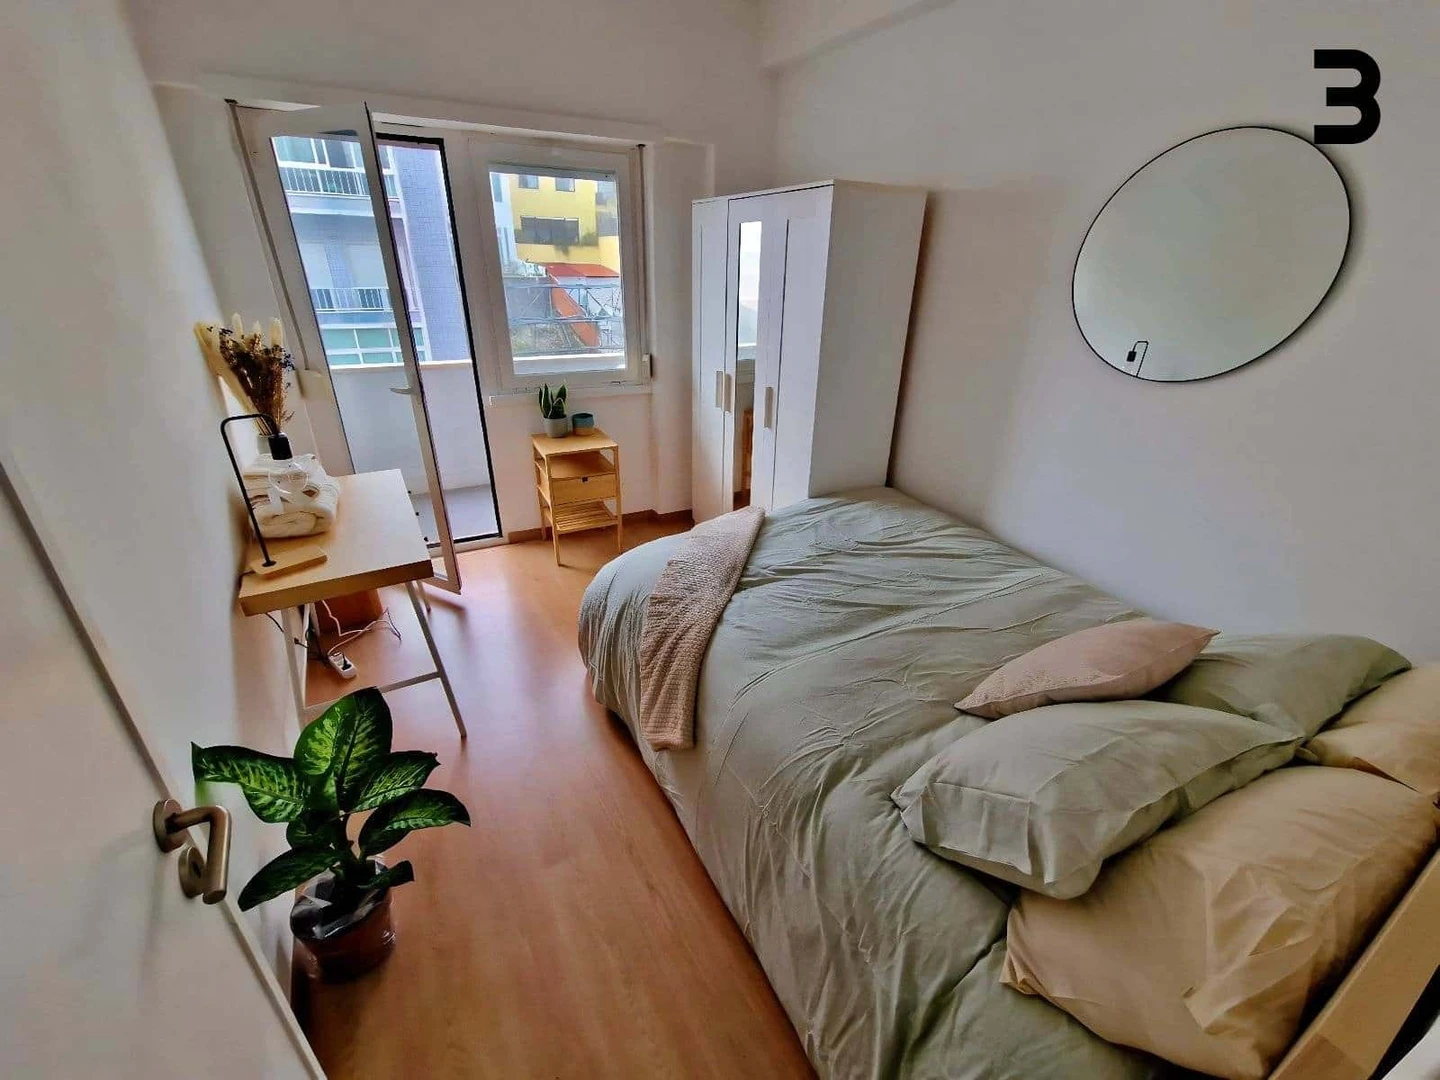 Room for rent in a shared flat in lisboa